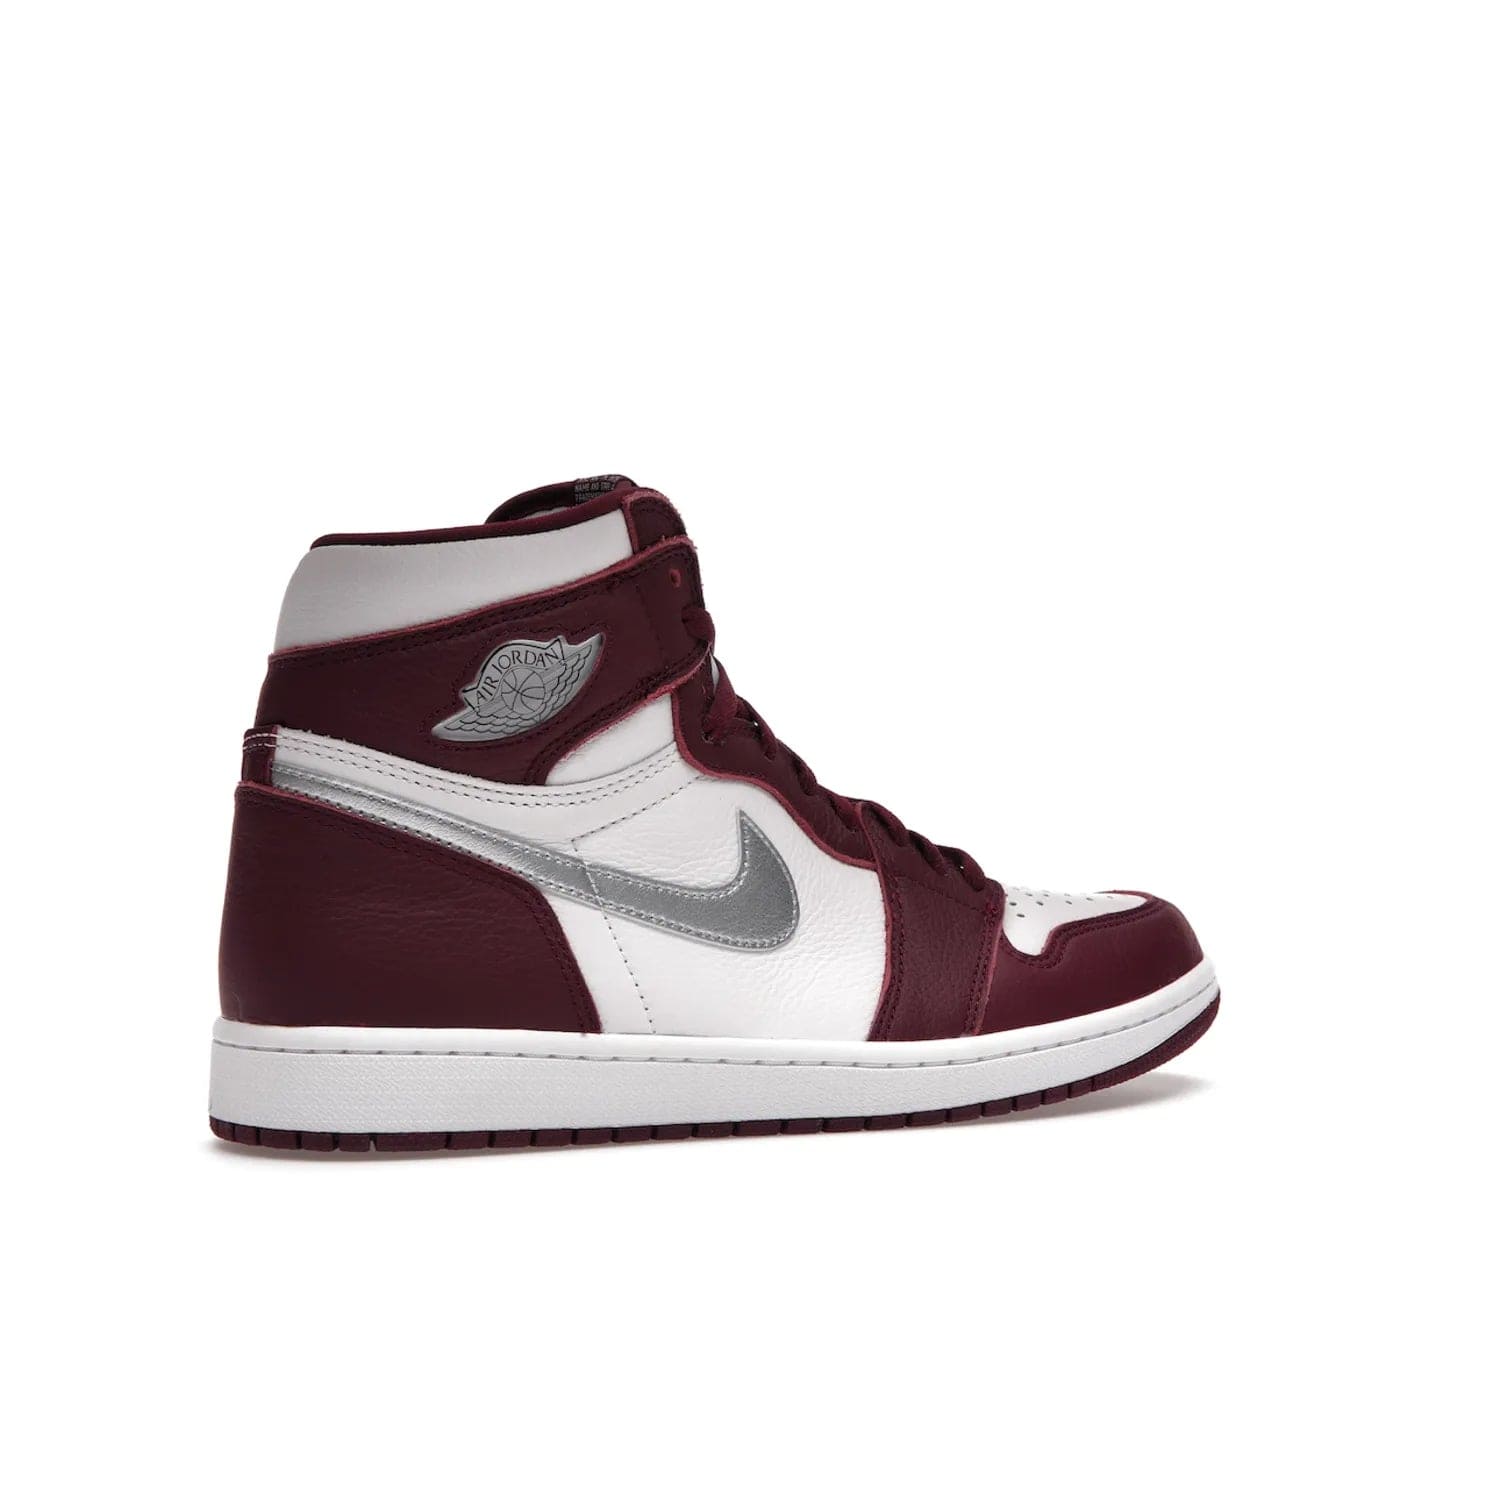 Jordan 1 Retro High OG Bordeaux - Image 34 - Only at www.BallersClubKickz.com - Shop the classic Air Jordan 1 High Bordeaux with a modern high-top cut. The timeless Bordeaux and White-Metallic Silver colorway, releasing Nov 20, 2021, is perfect for practice or a night out.